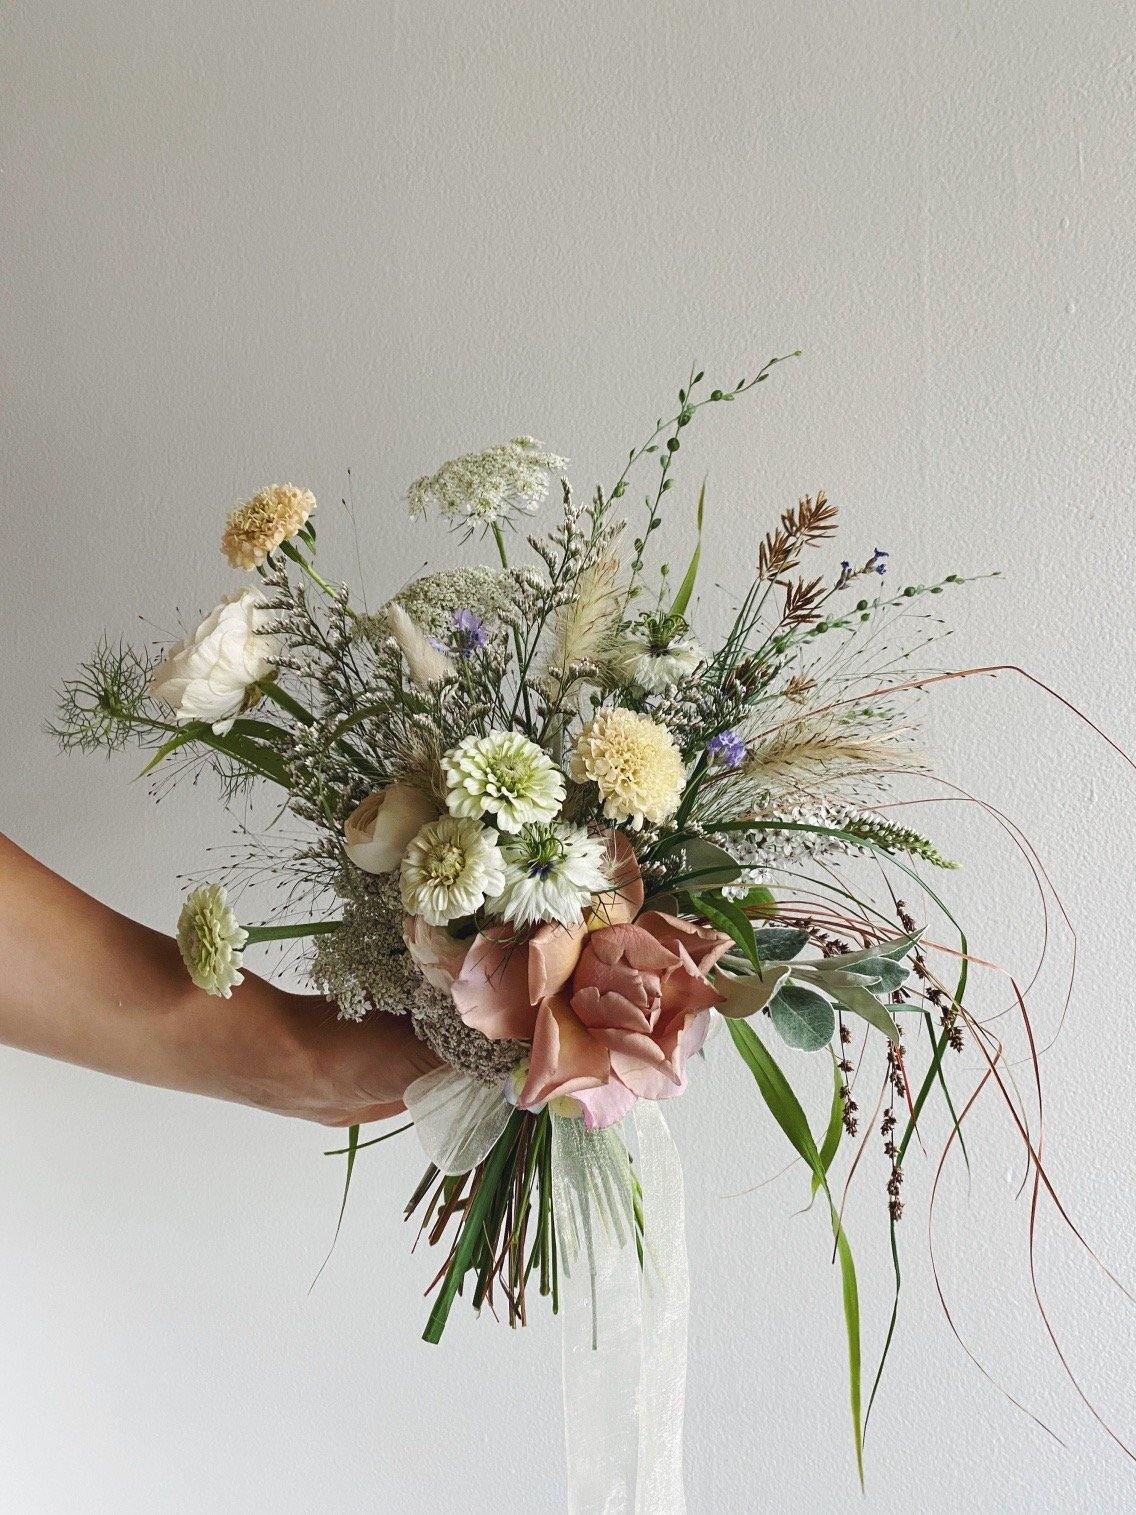 Weddings - The Signature Bridal Bouquet - The Wild Bunch Weddings - The Wild Bunch Florist - Vancouver Flower Shop Delivery